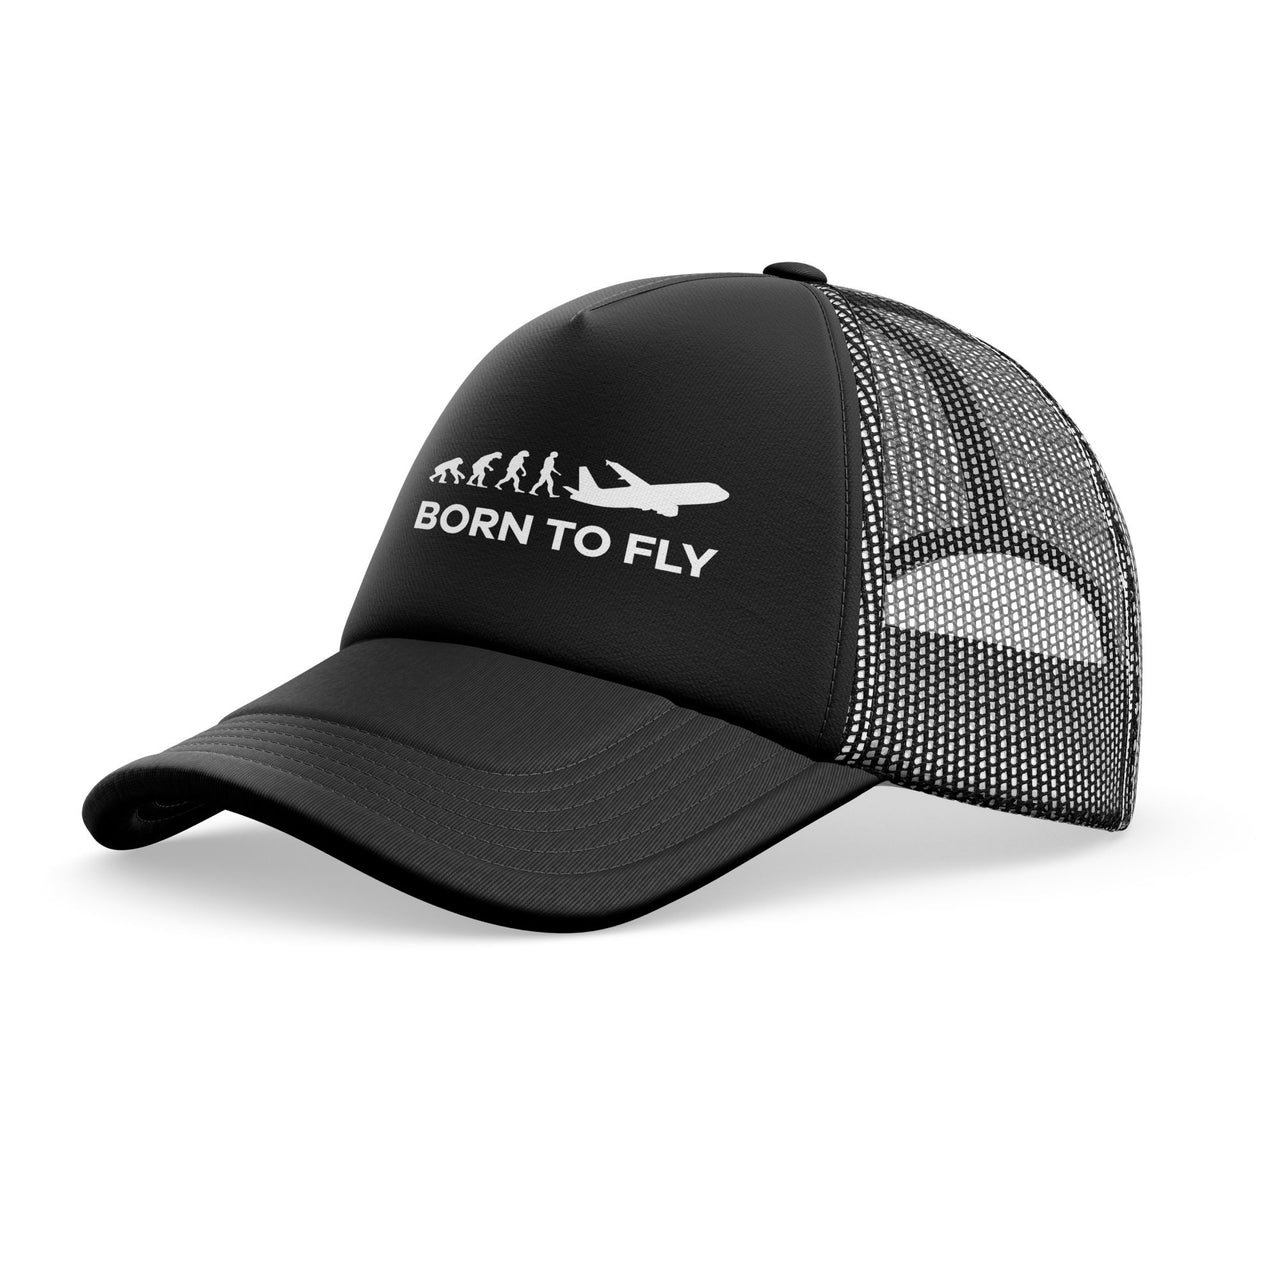 Born To Fly Designed Trucker Caps & Hats